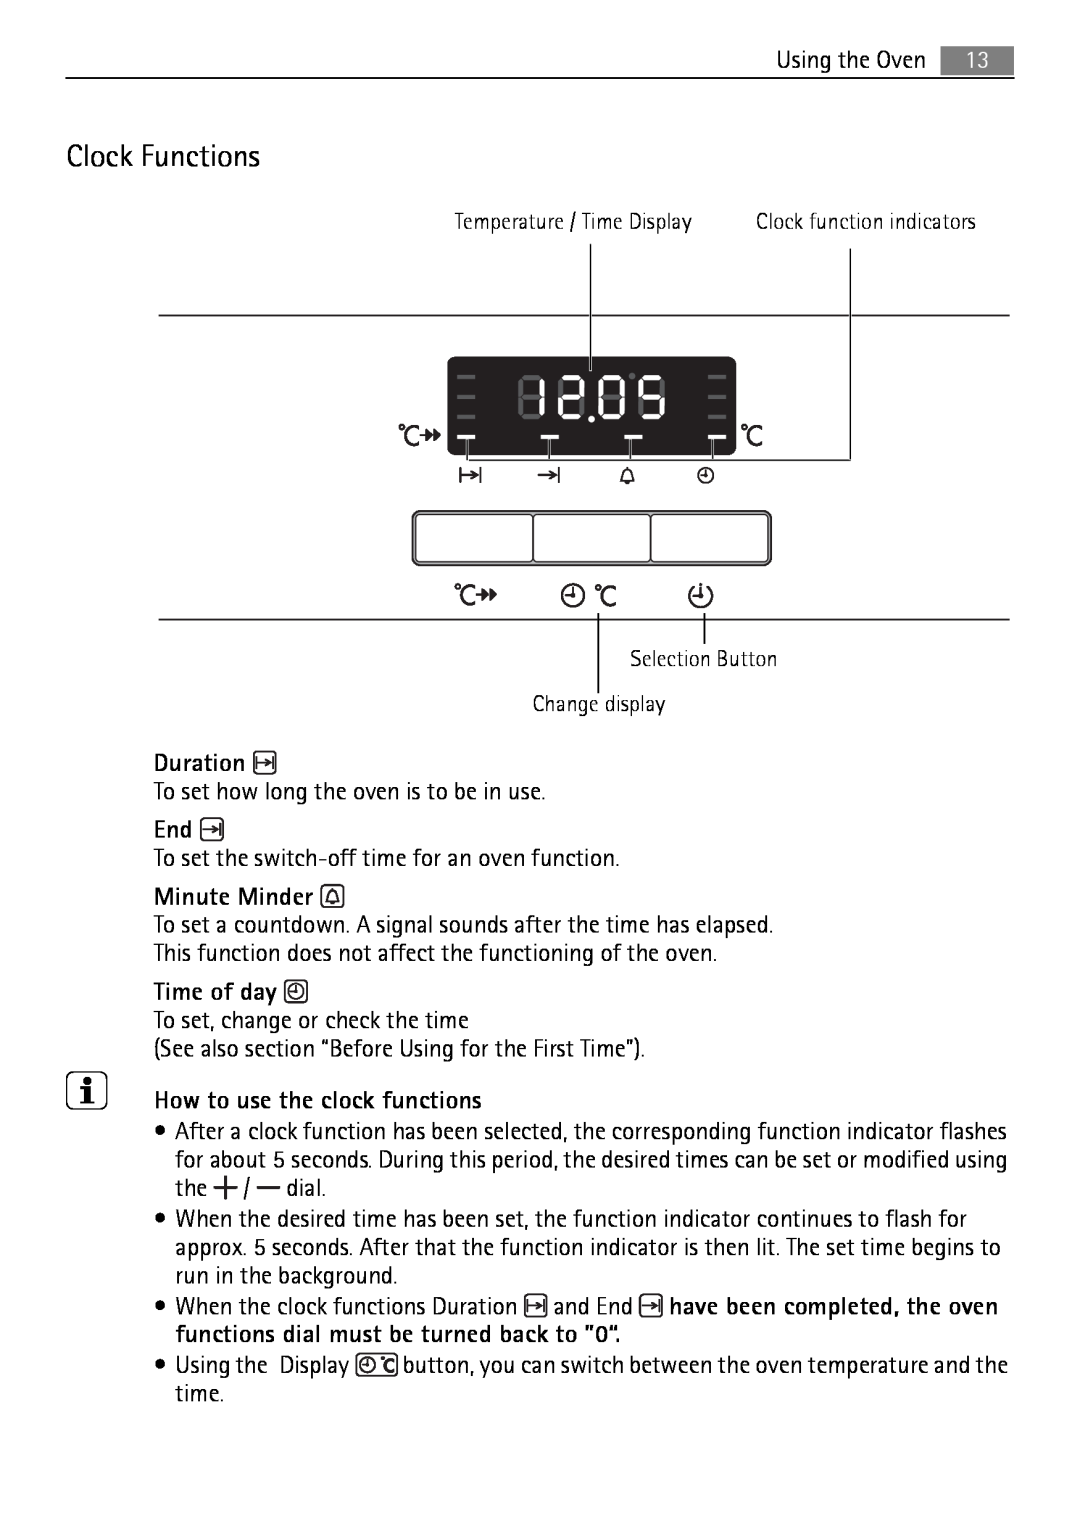 Electrolux B3741-5 user manual Clock Functions, Duration, Minute Minder, Time of day, How to use the clock functions 